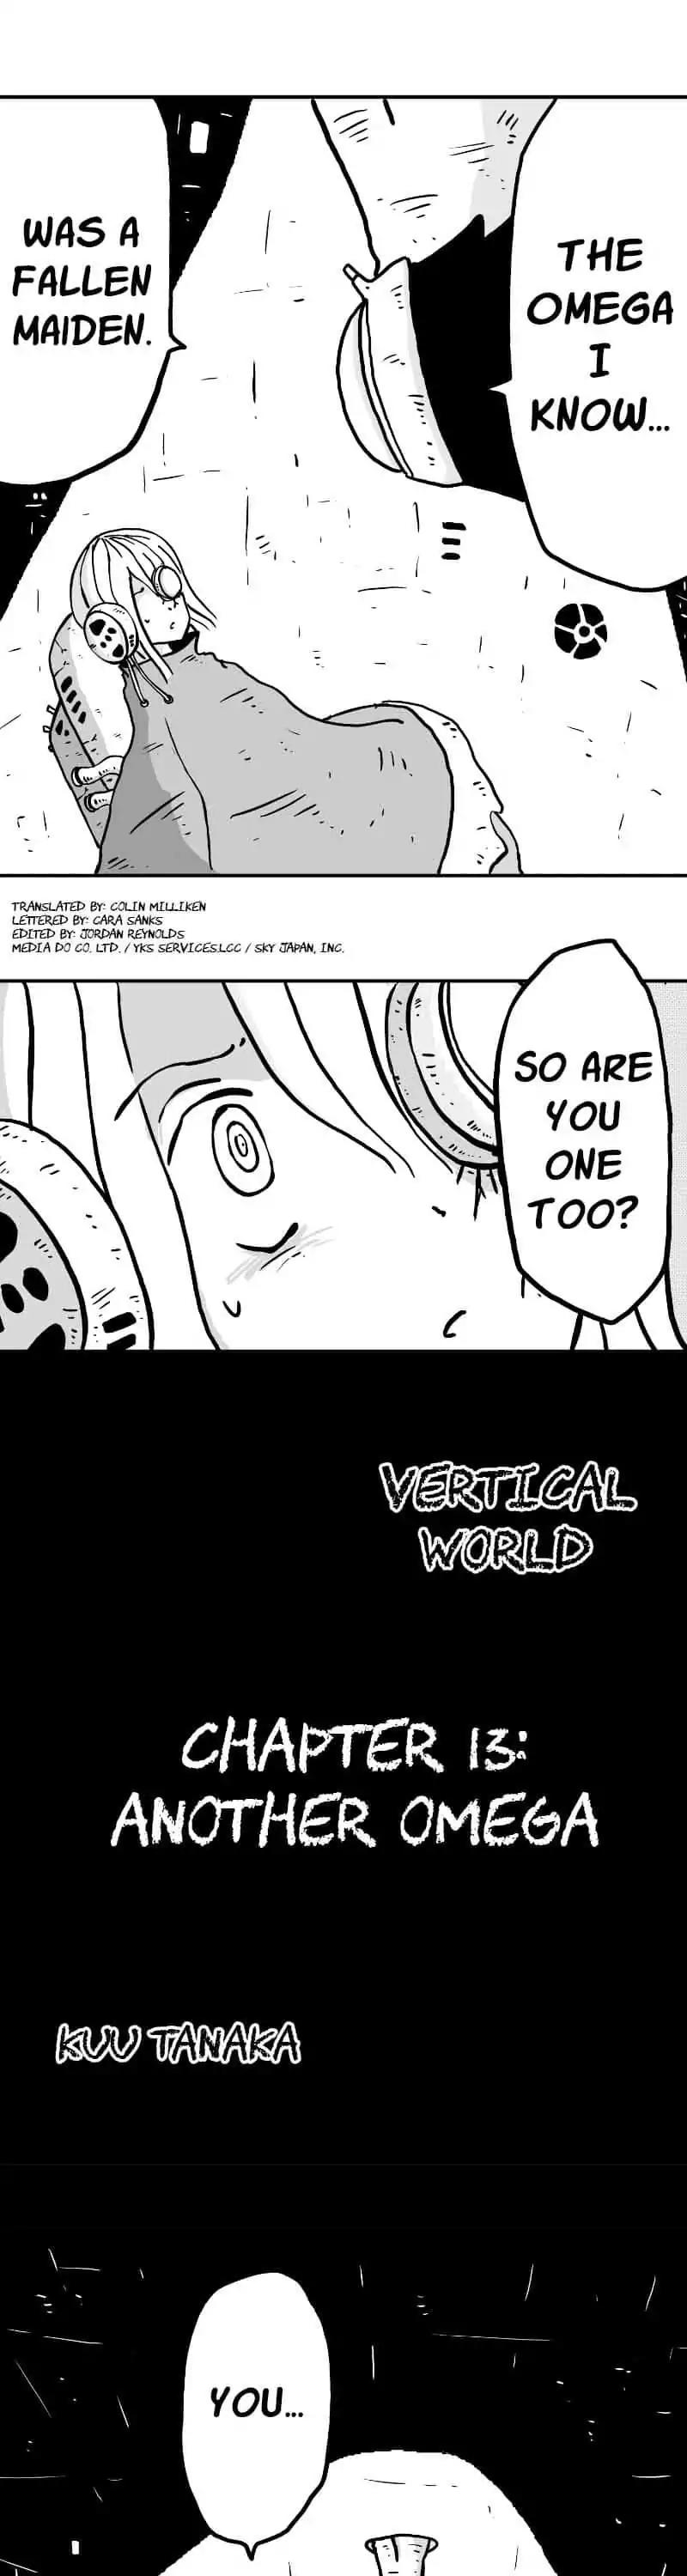 The Vertical World Chapter 13: